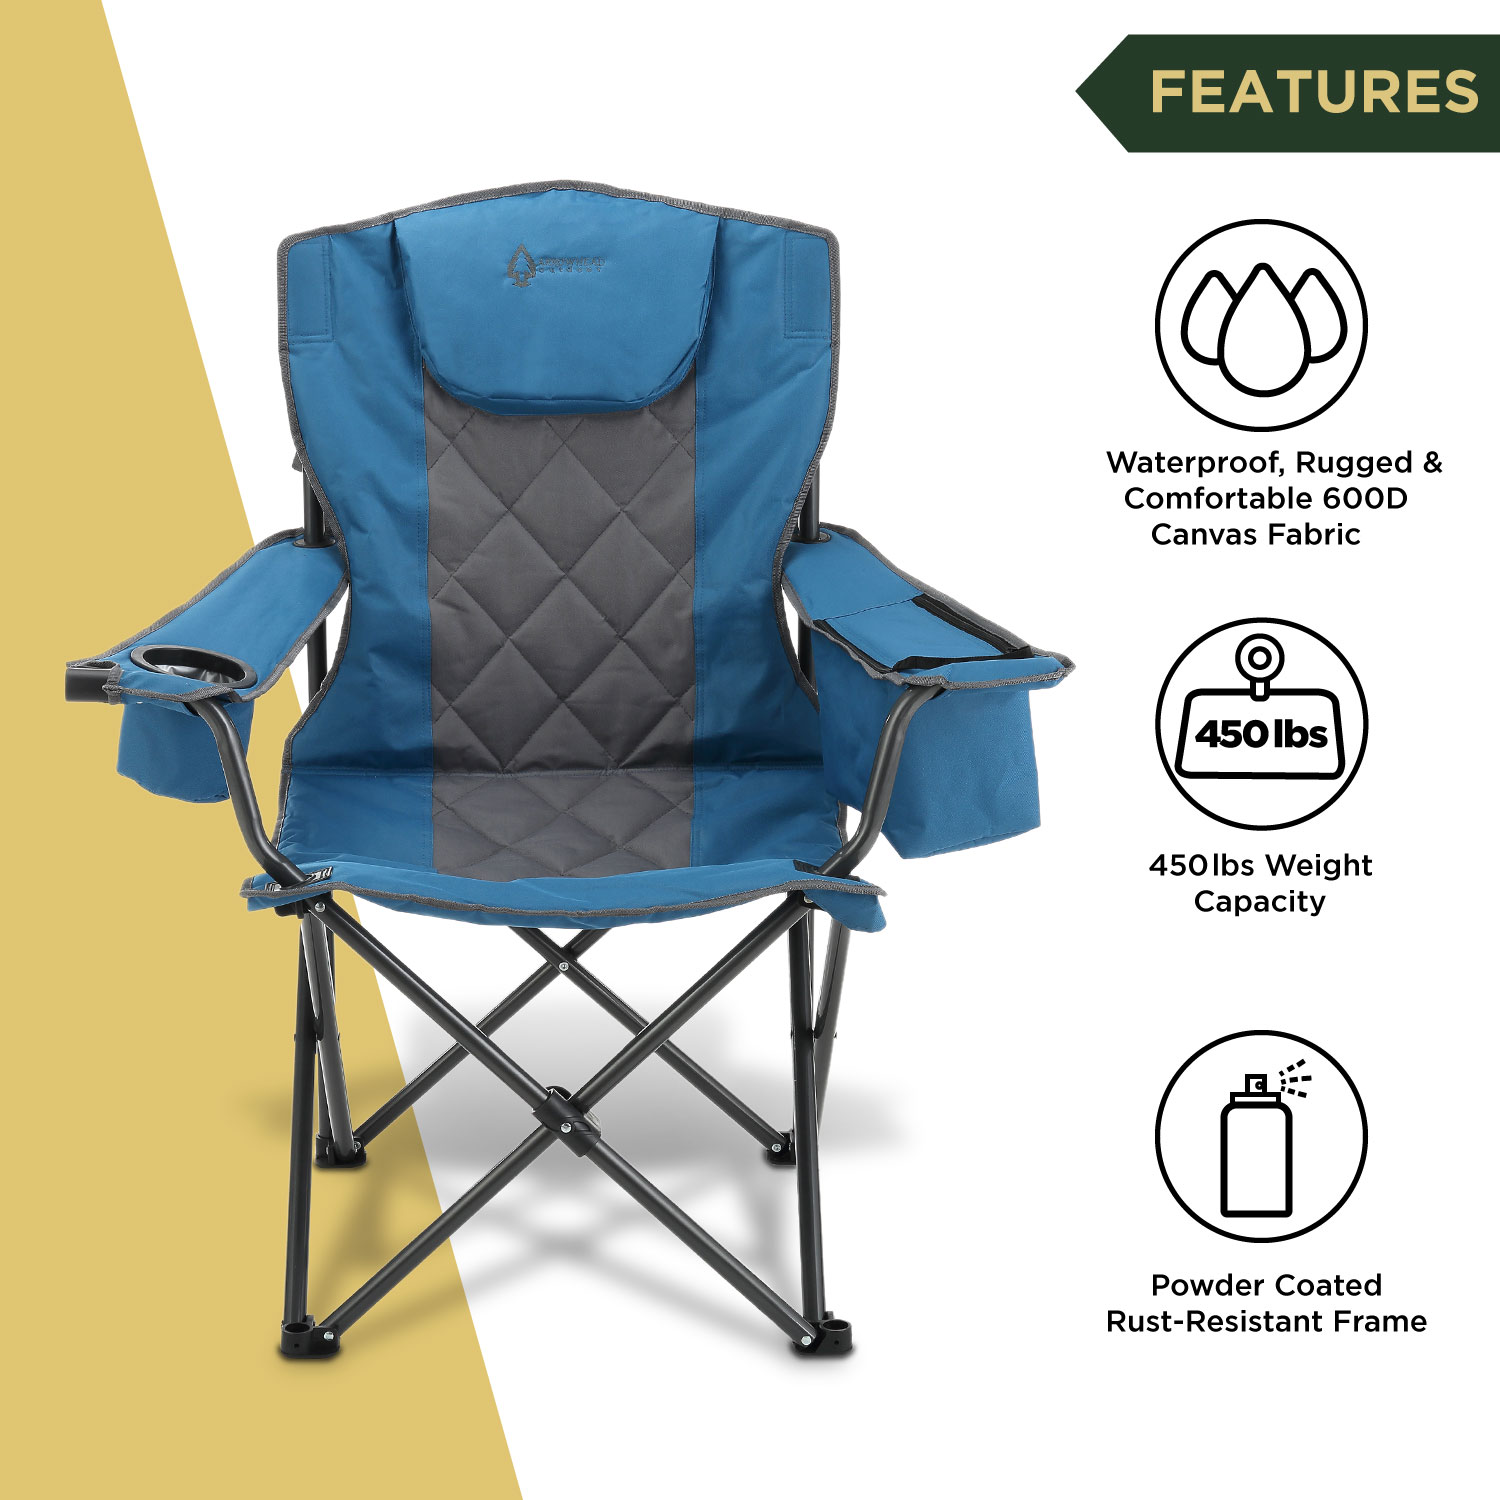 ARROWHEAD OUTDOOR Portable Folding Camping Quad Chair w/ 6-Can Cooler, Cup   Wine Glass Holders, Heavy-Duty Carrying Bag, Padded Armrests, Headrest,  Supports up to 450lbs, USA-Based Support (Blue)